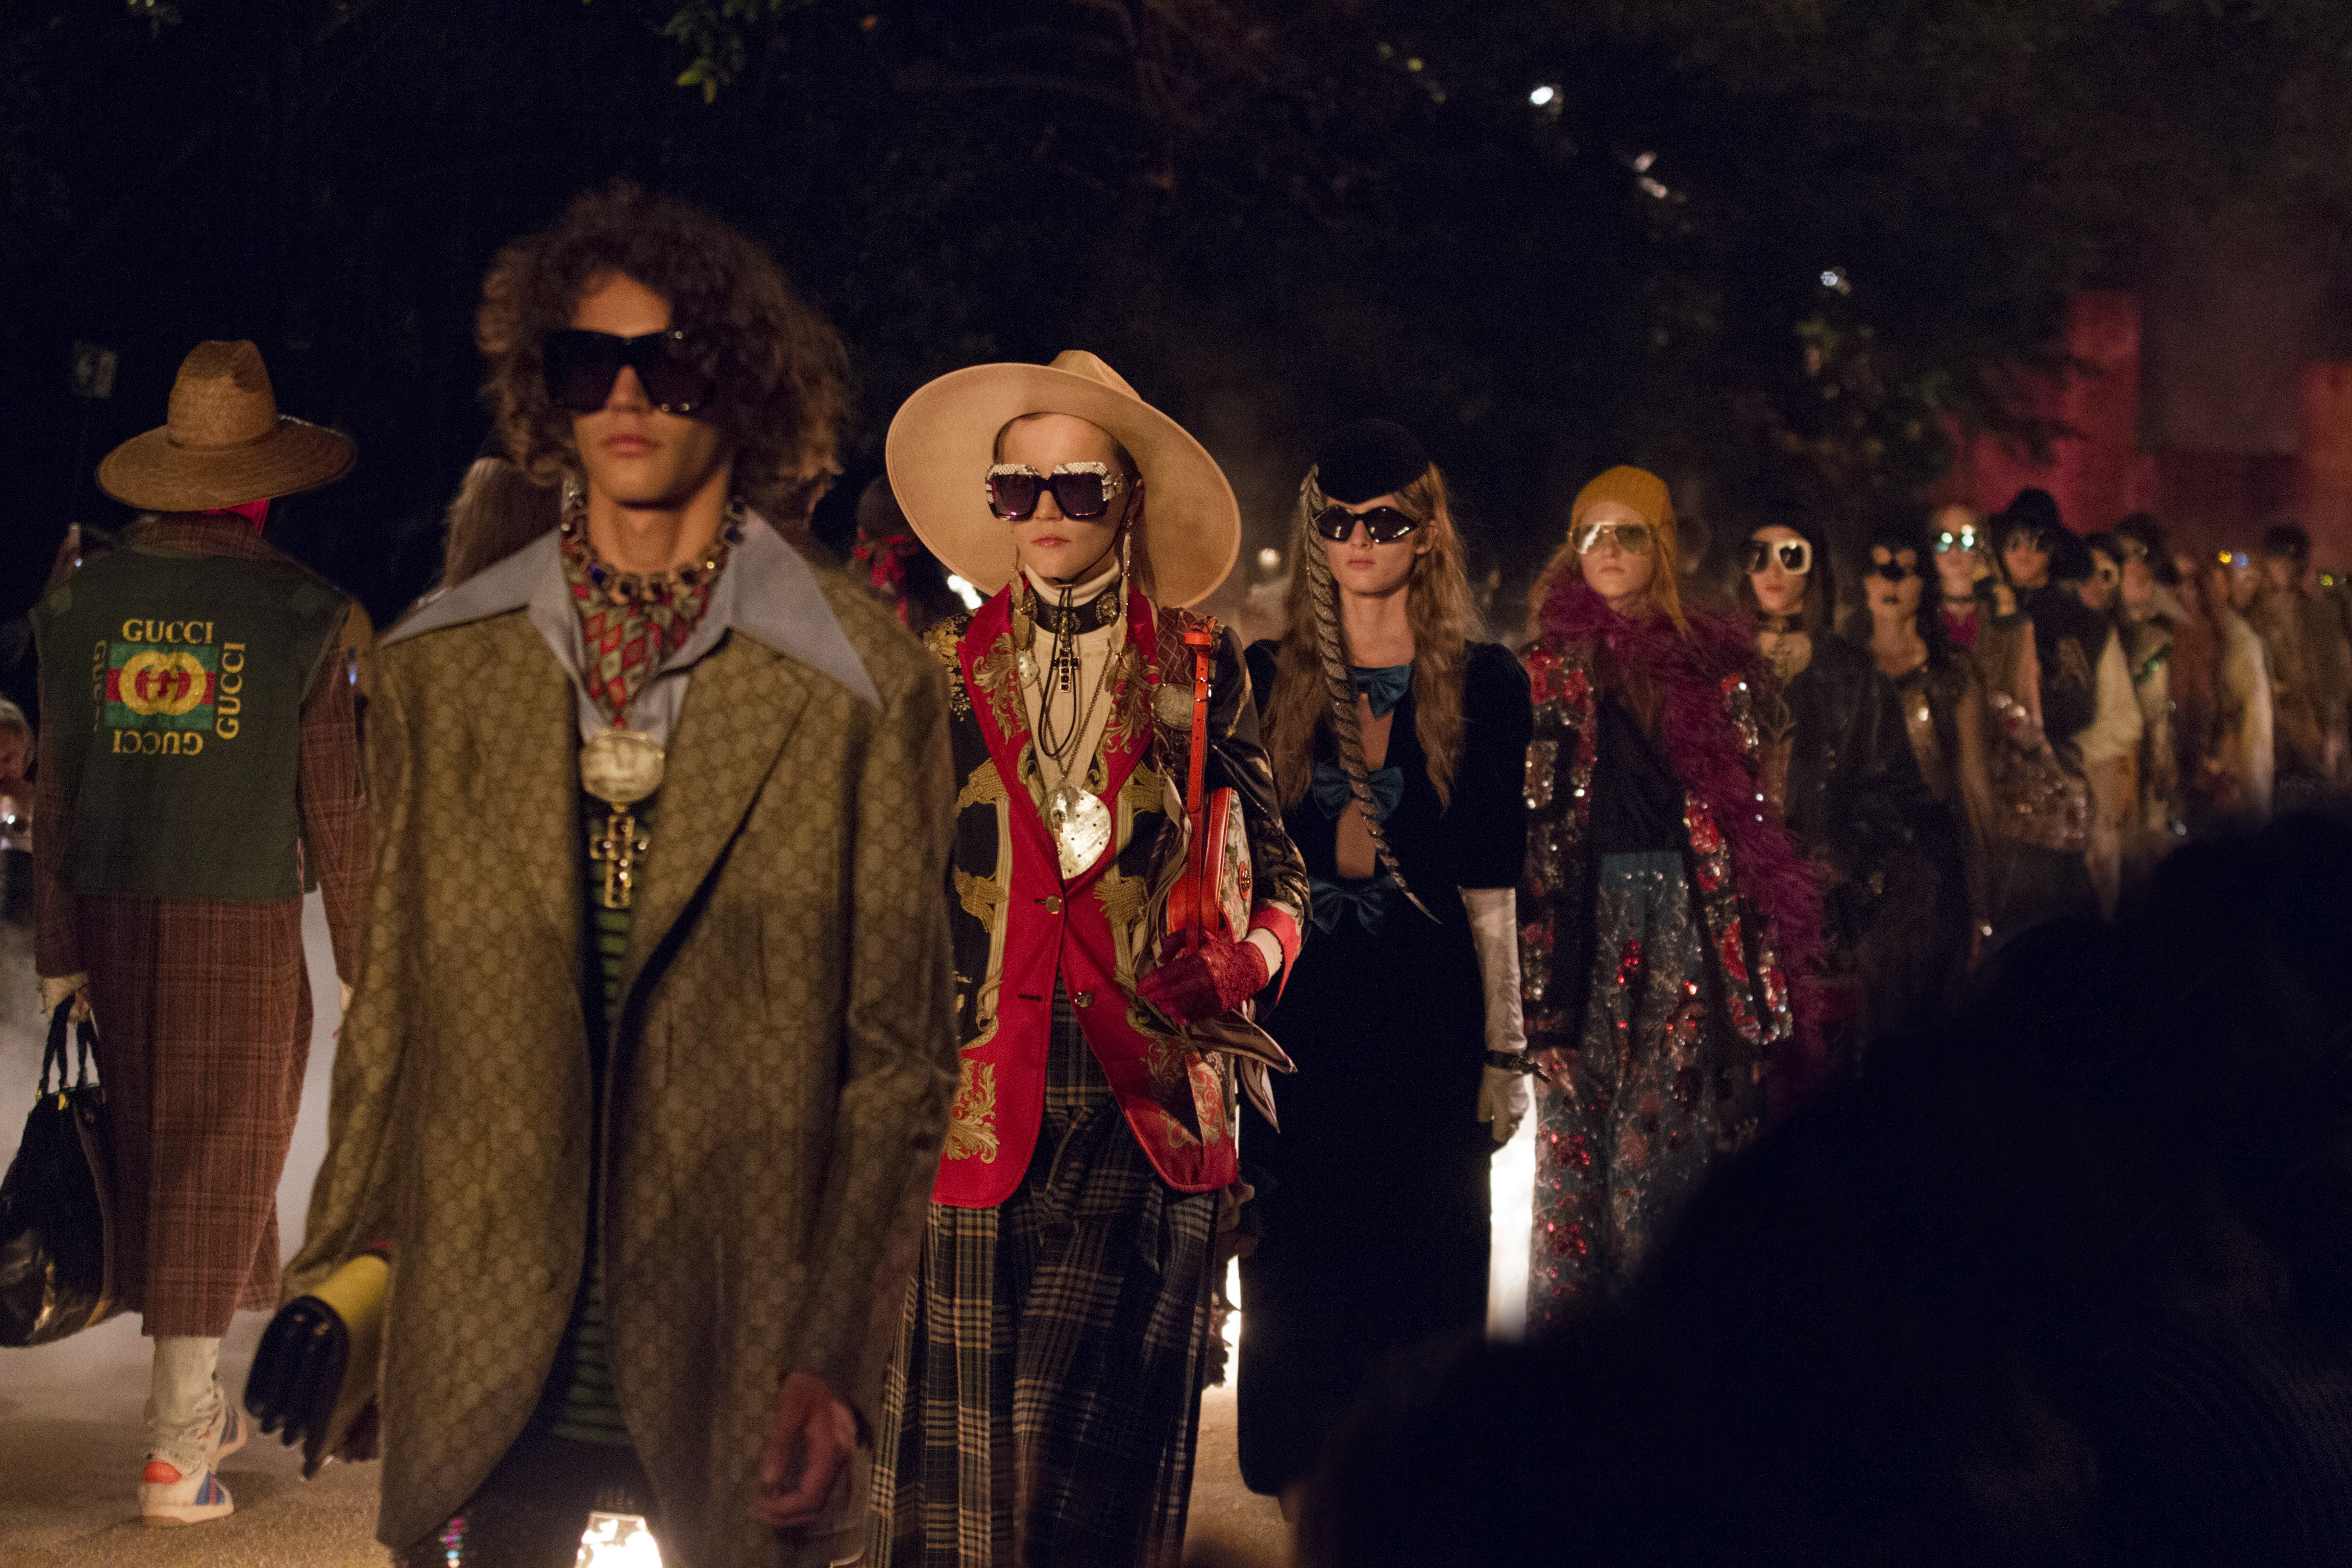 Gucci creations by creative director Alessandro Michele, such as its Cruise 2019 fashion show (above) in Arles, France, in May, have gone down well with consumers, who like the Italian fashion brand’s mash-up of high and low cultural references.